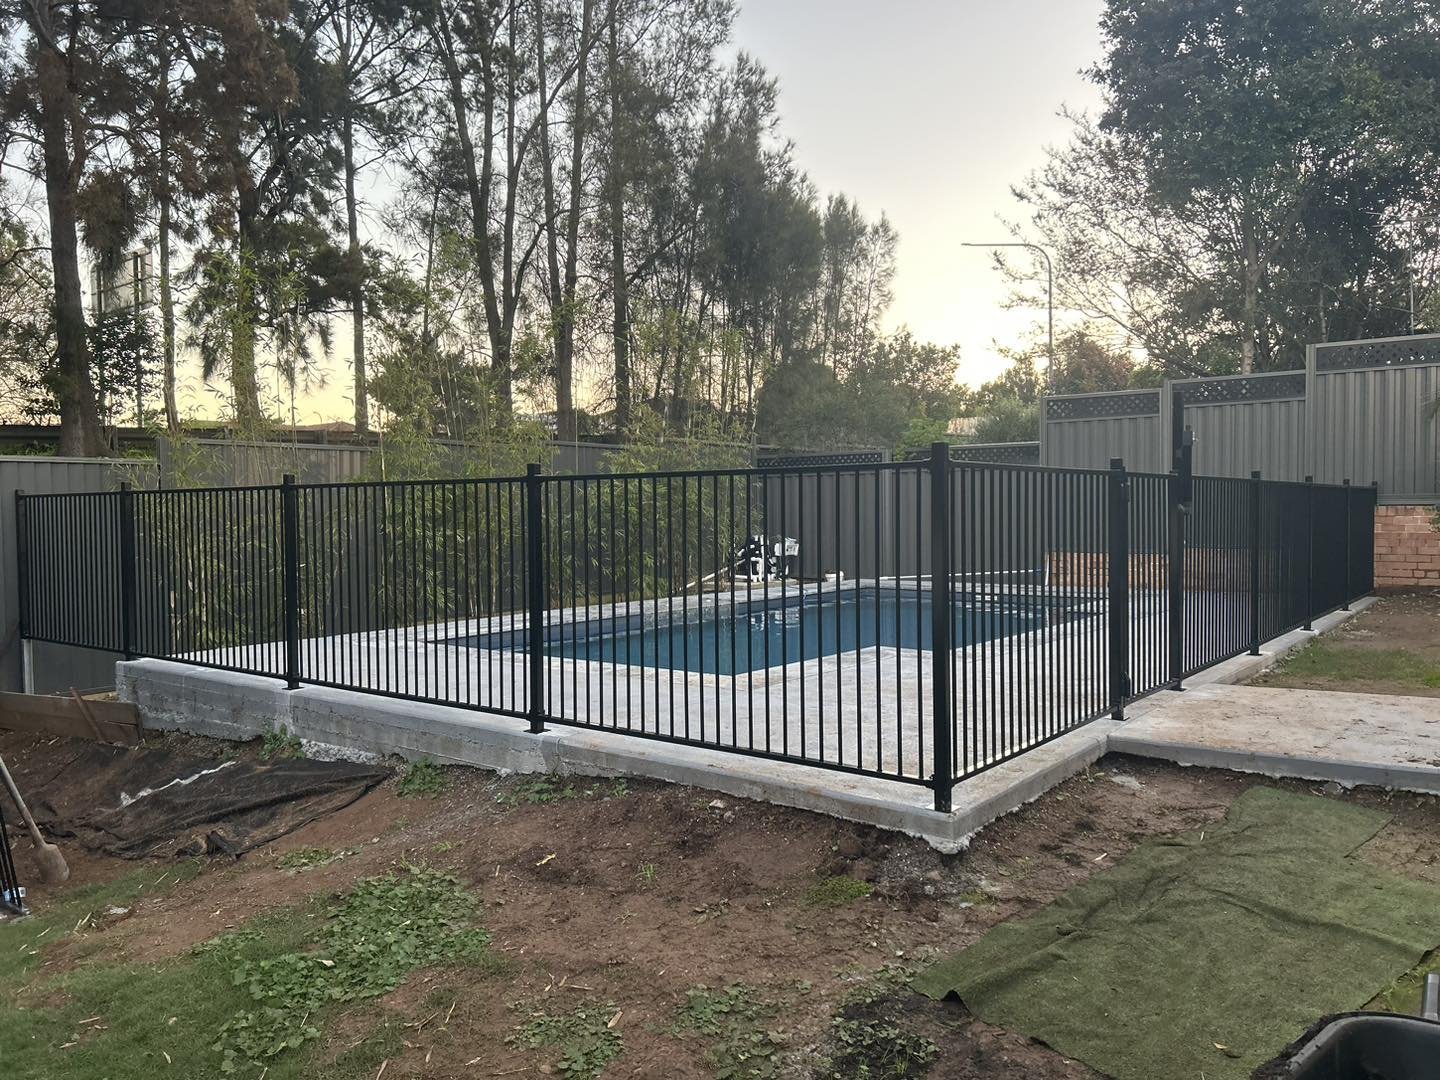 Recently installed this satin black pool fence for some lovely existing clients to compliment the new pool.  #poolfencing #poolfencingcompliance #ddtechnologies #polaris #gardenfencing #smallbusinessbigdreams #supportingsmallbusiness #fabricator #wel